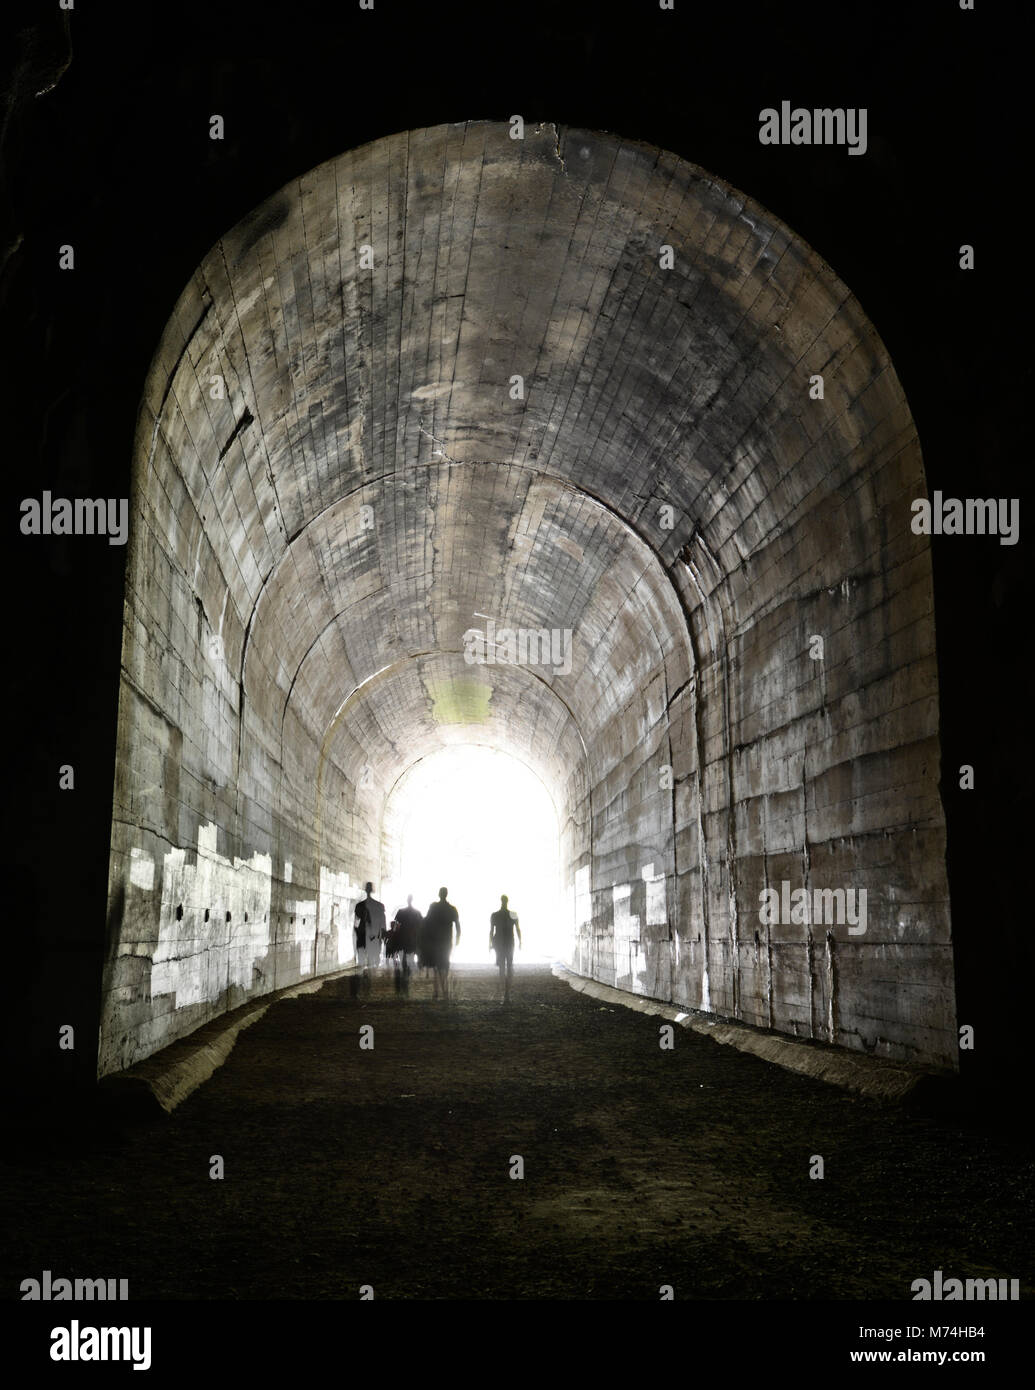 An old and decommissioned railway tunnel. Stock Photo